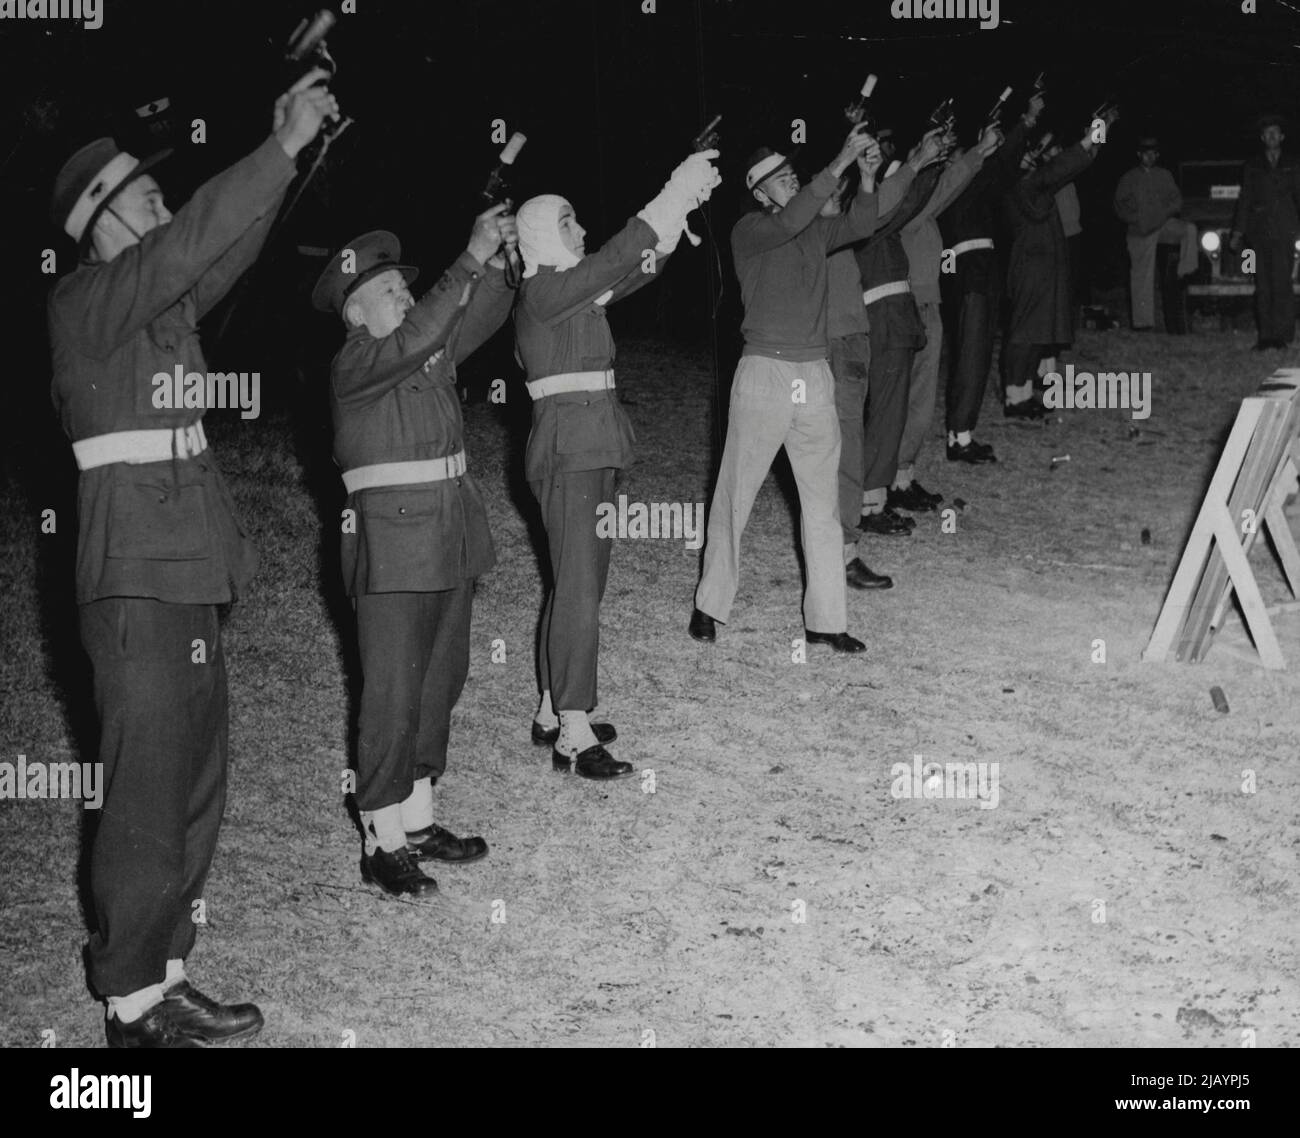 Army personal being trained in the use of Verey Pistols in preparation for the 2nd security hear aerobic carnival in farm cave on Nov 2. October 29, 1946. Stock Photo